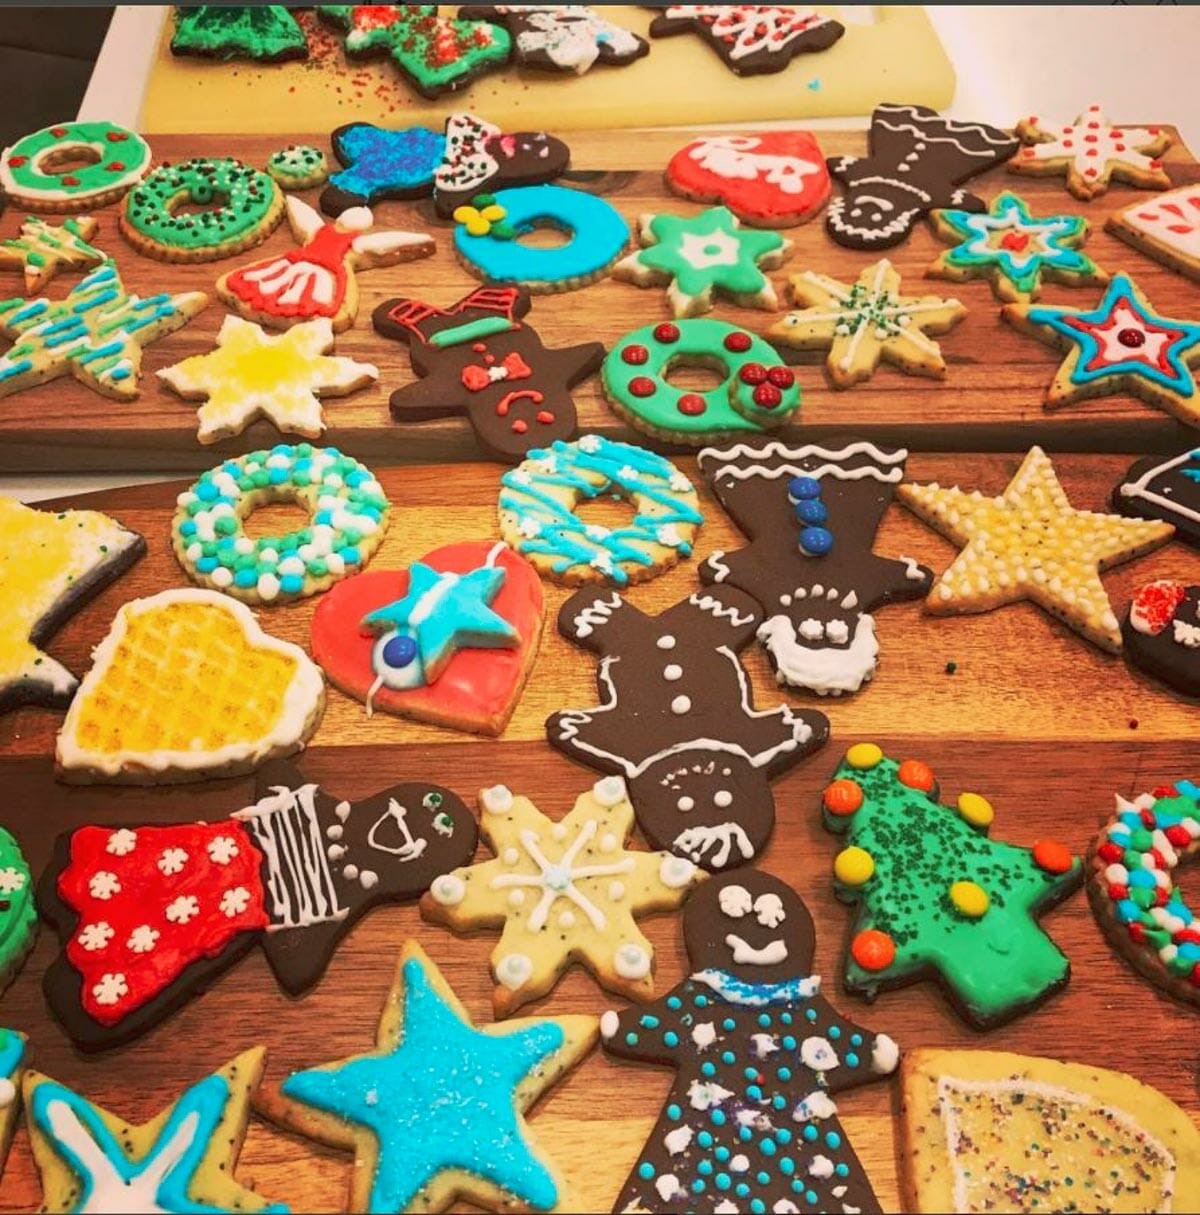 Colourful assortment of decorated holiday cookies spread out on wooden countertop.